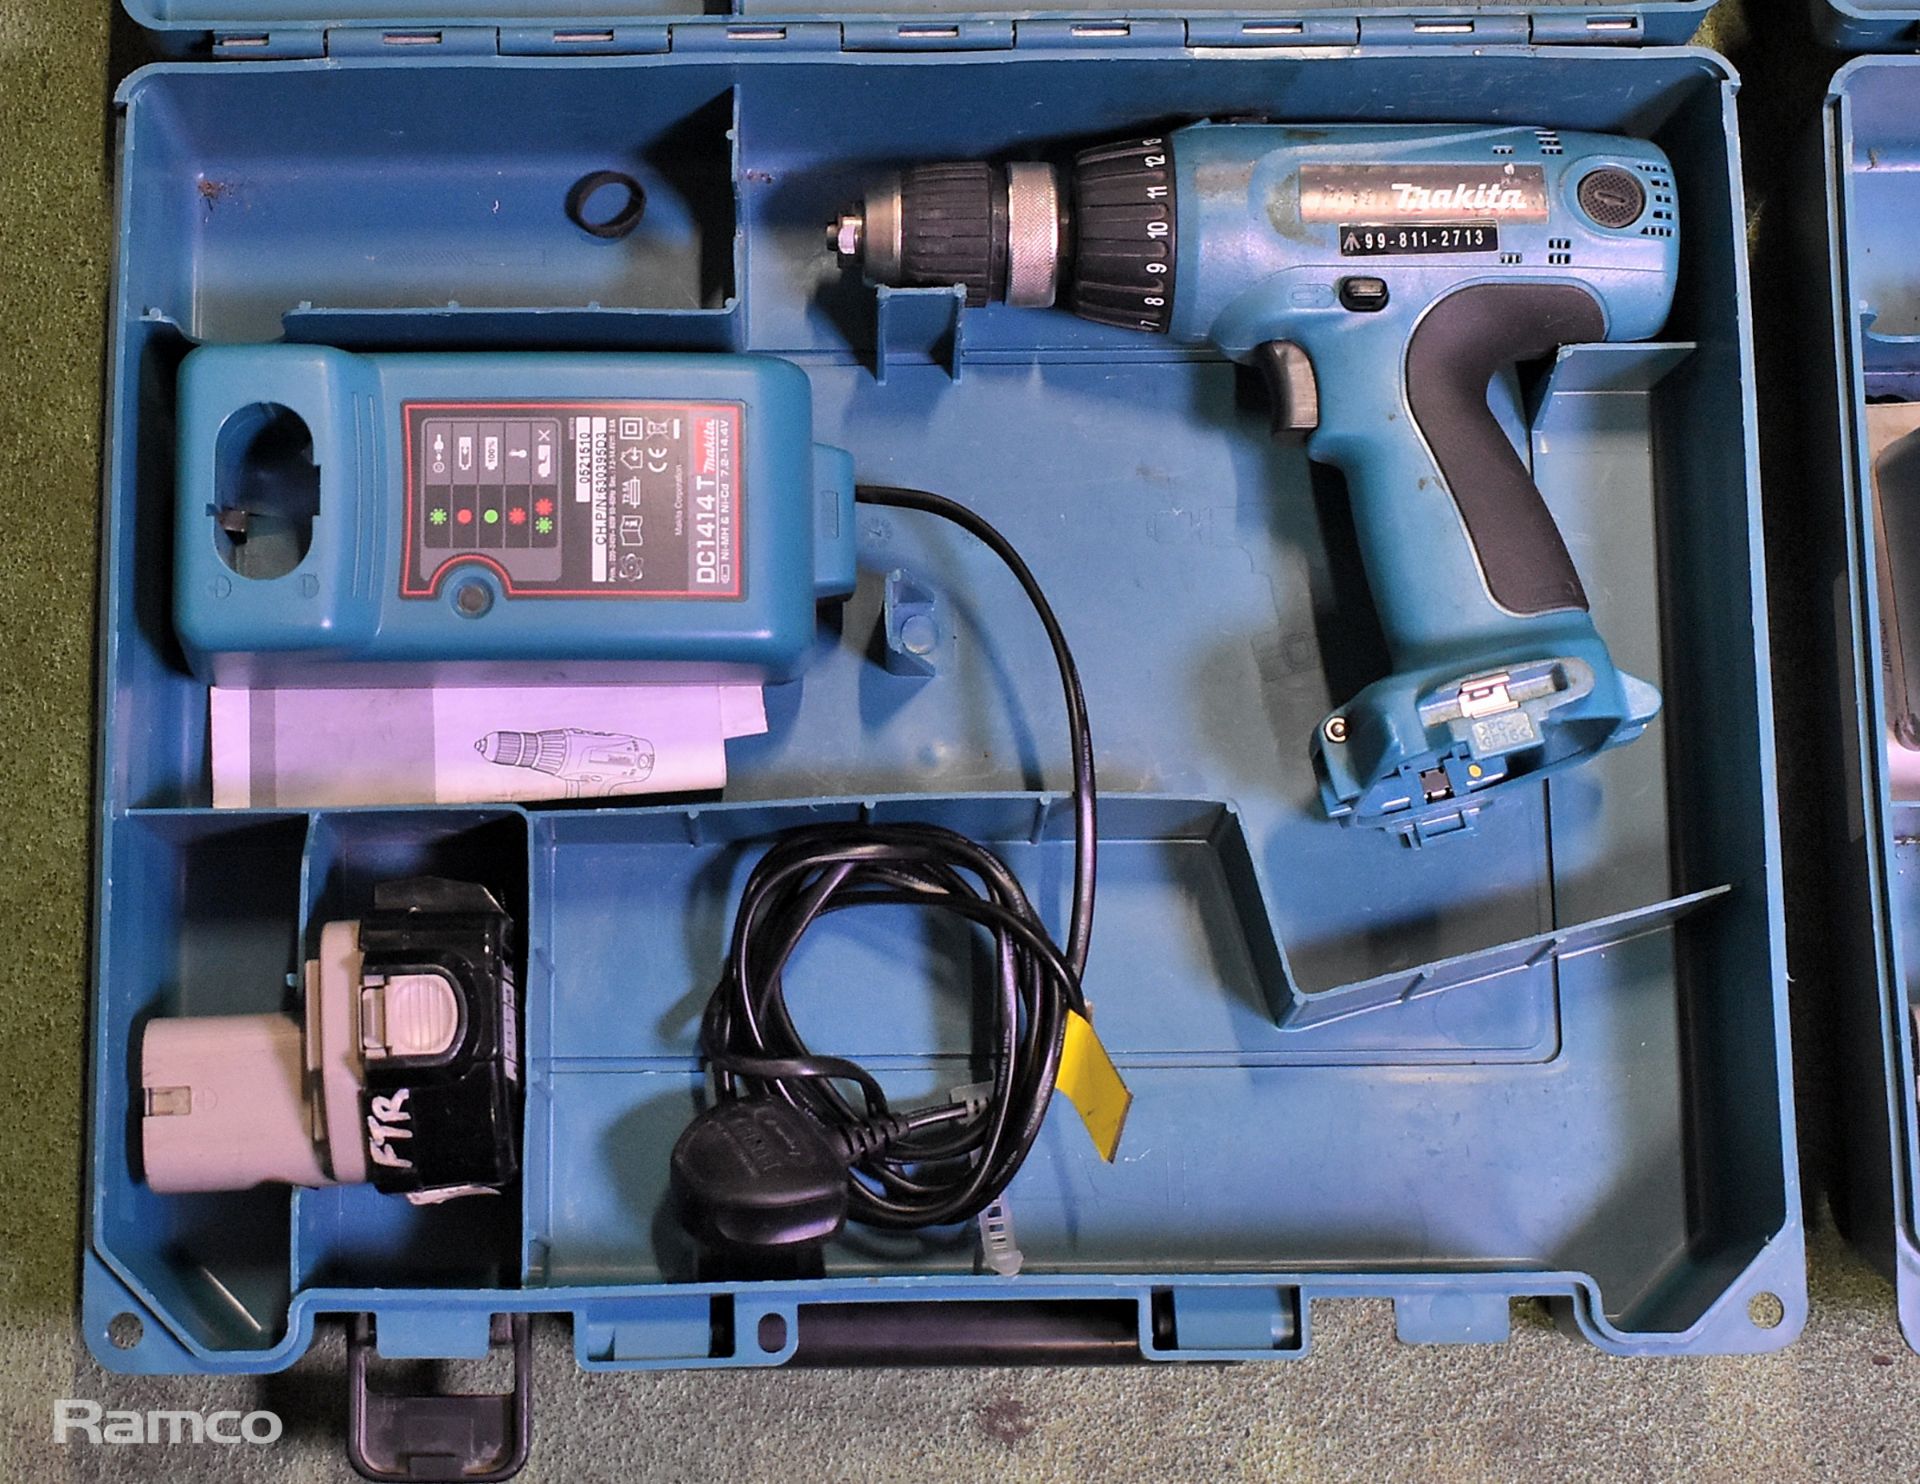 2x Makita 6317D cordless drills - DC1414T charger - 1x 12V battery - case - Image 2 of 8